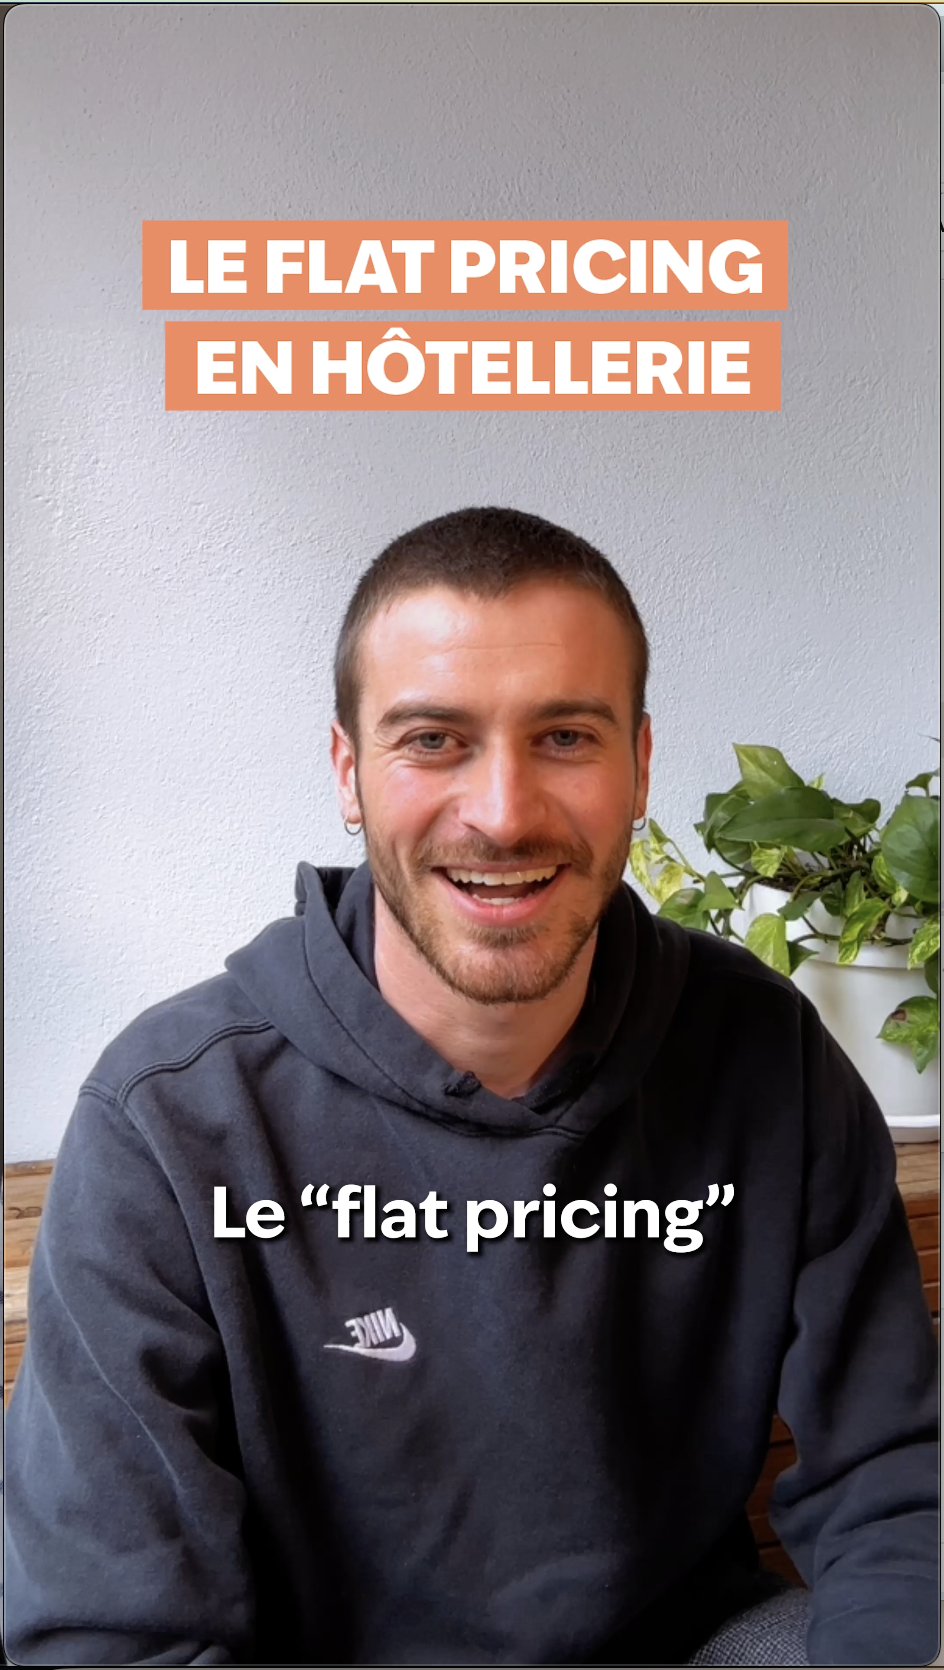 Le flat pricing